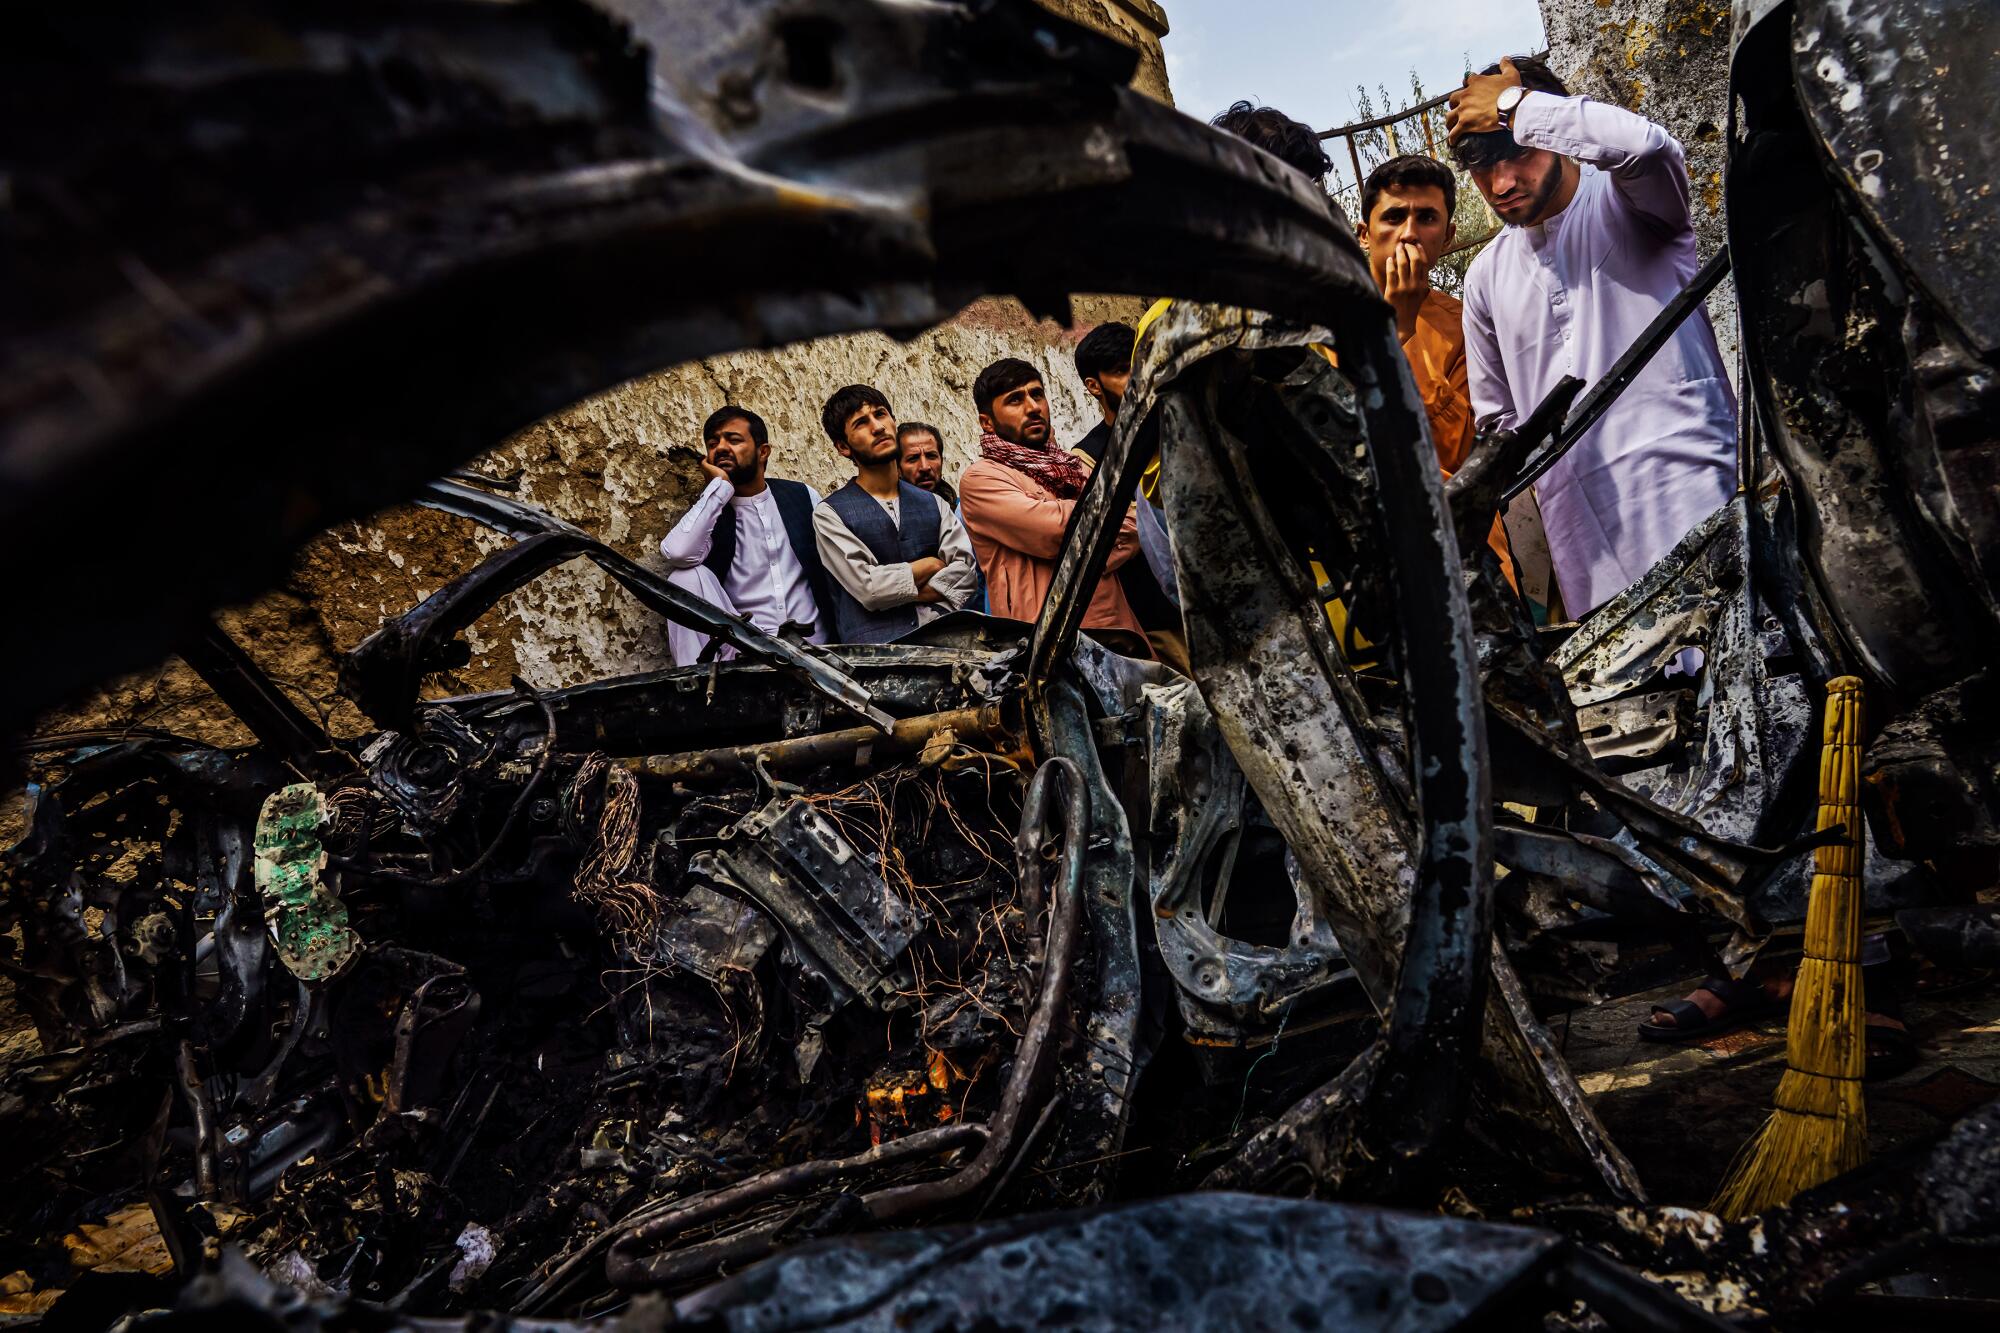 An Afghani family is framed by the wreckage of a U.S. drone strike that killed 10 civilians including seven children.